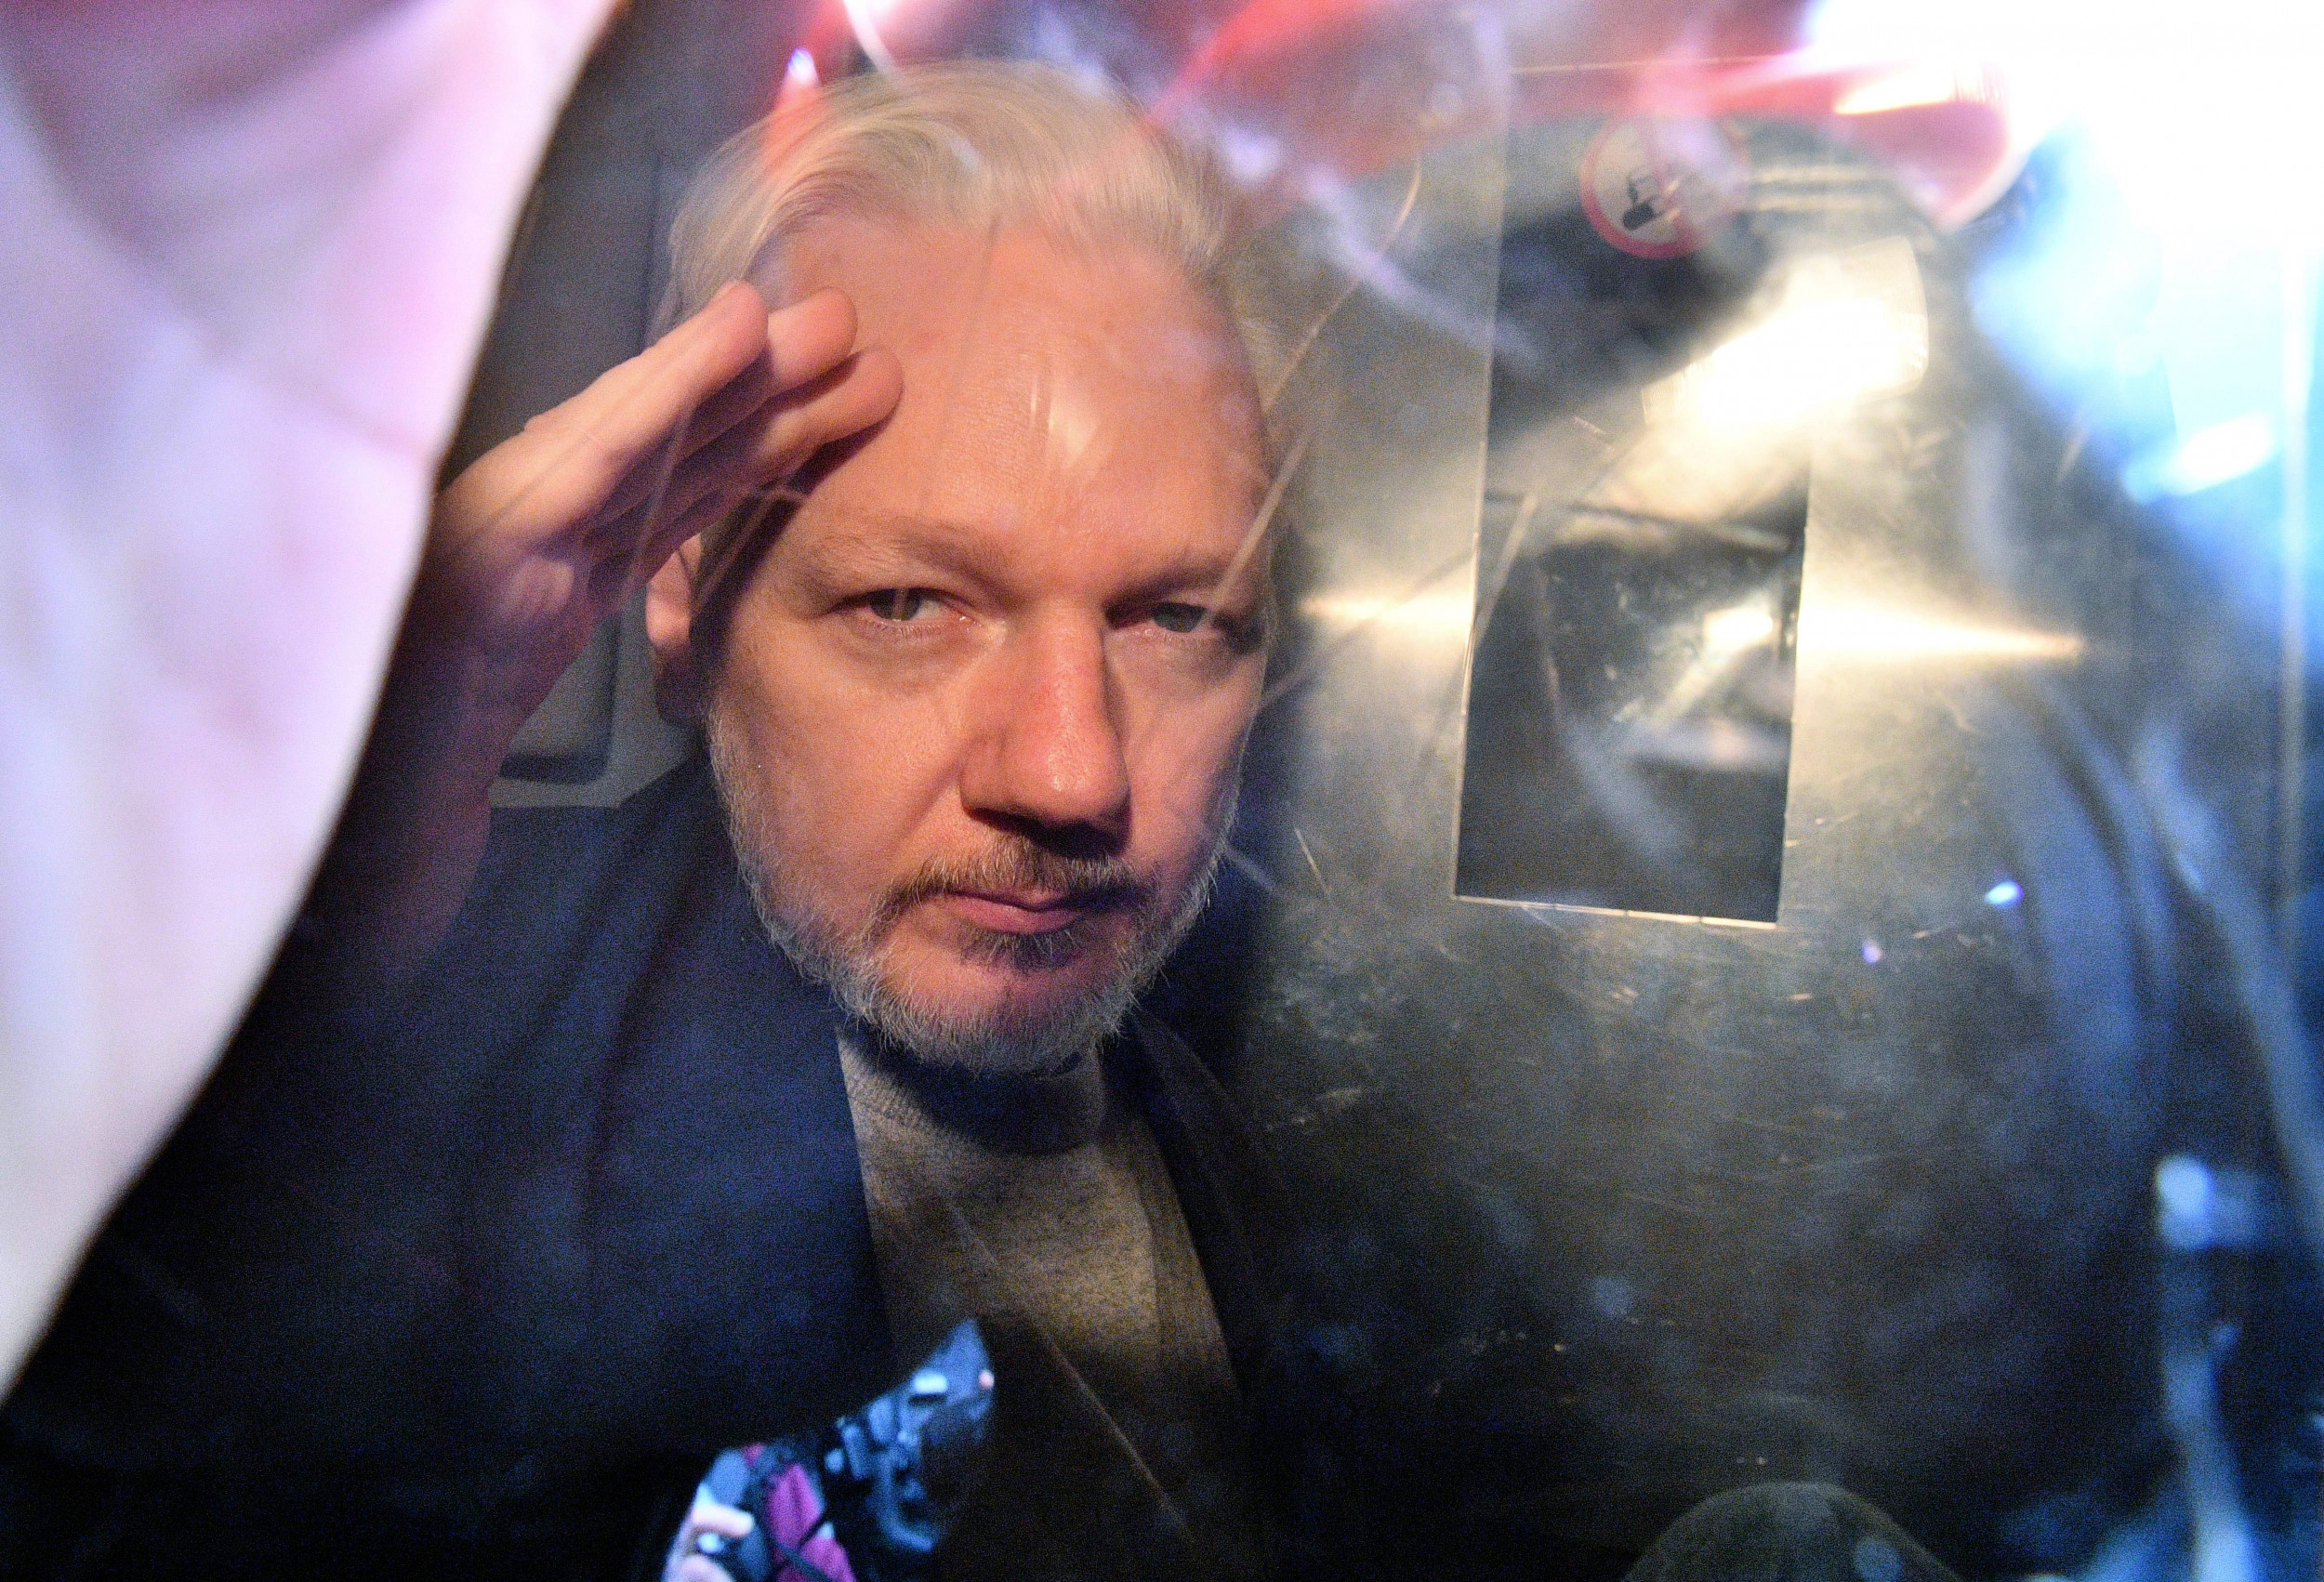 WikiLeaks editor calls Assange extradition arguments “hollow words” as